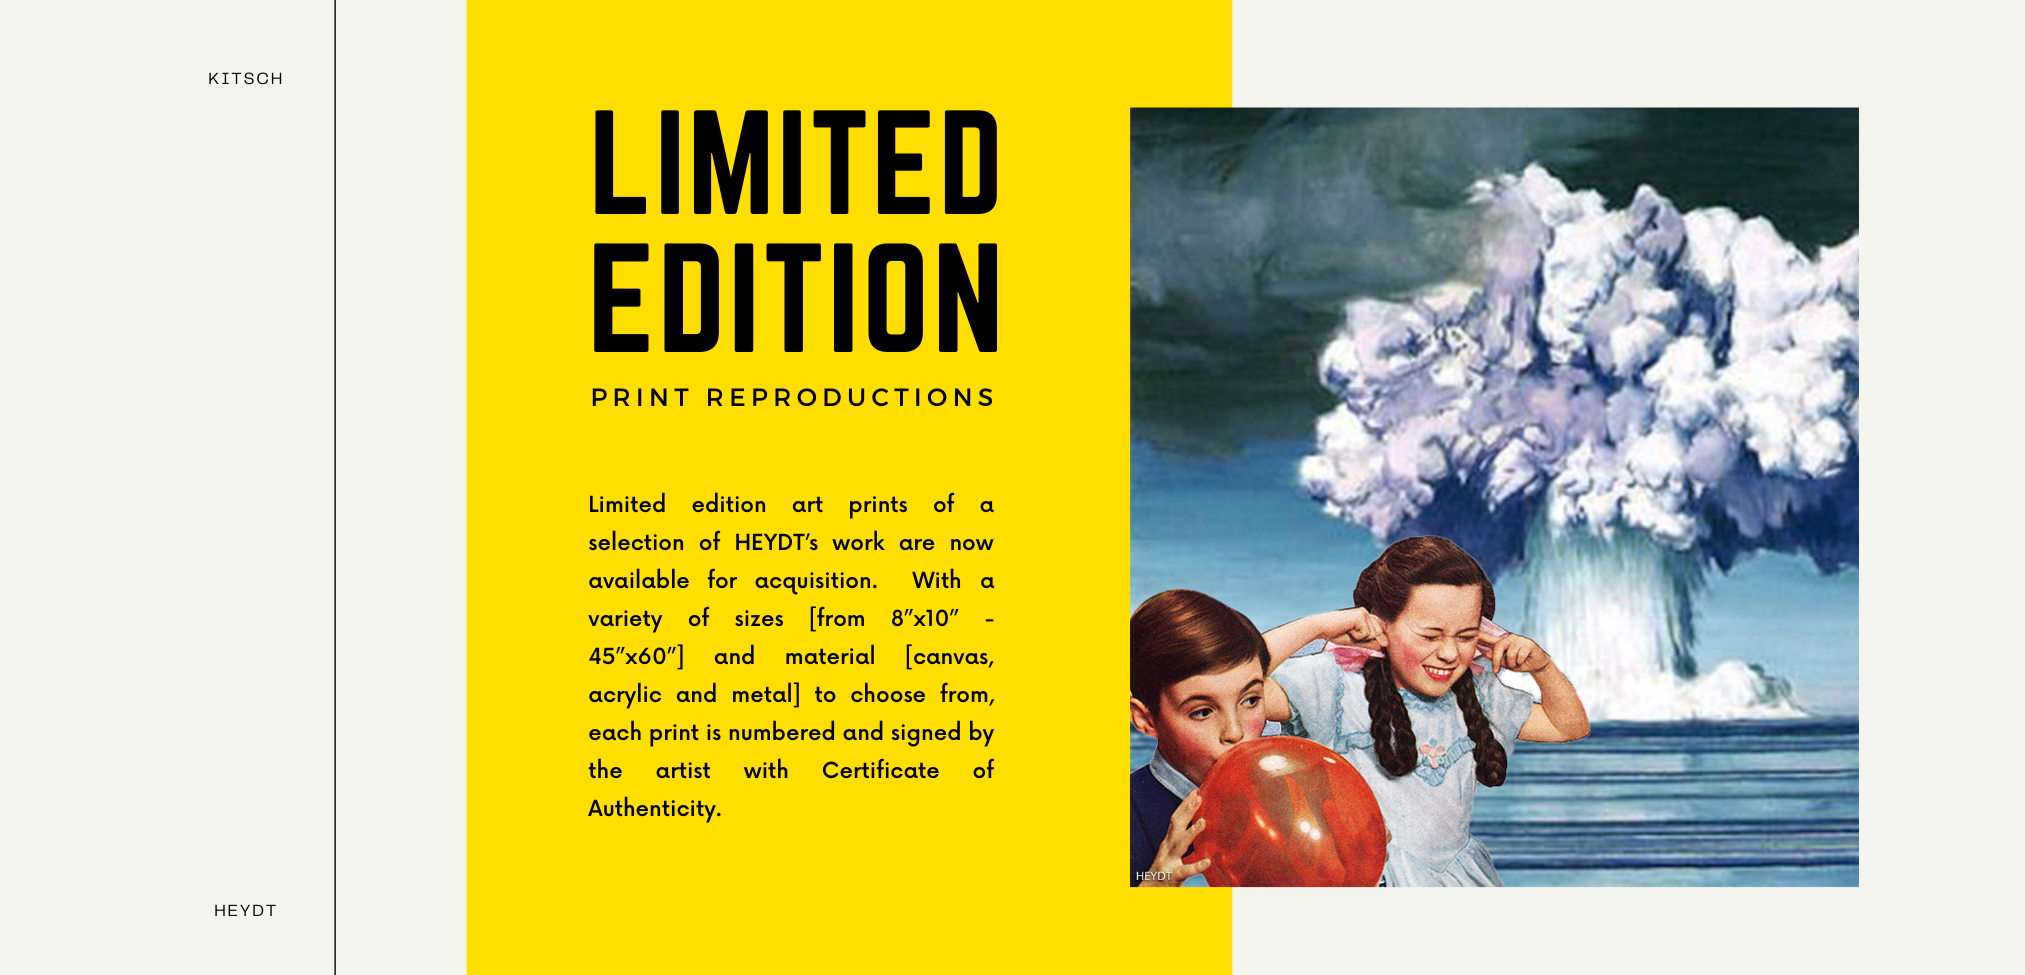 limited edition prints-KITSCH-HEYDT48.png